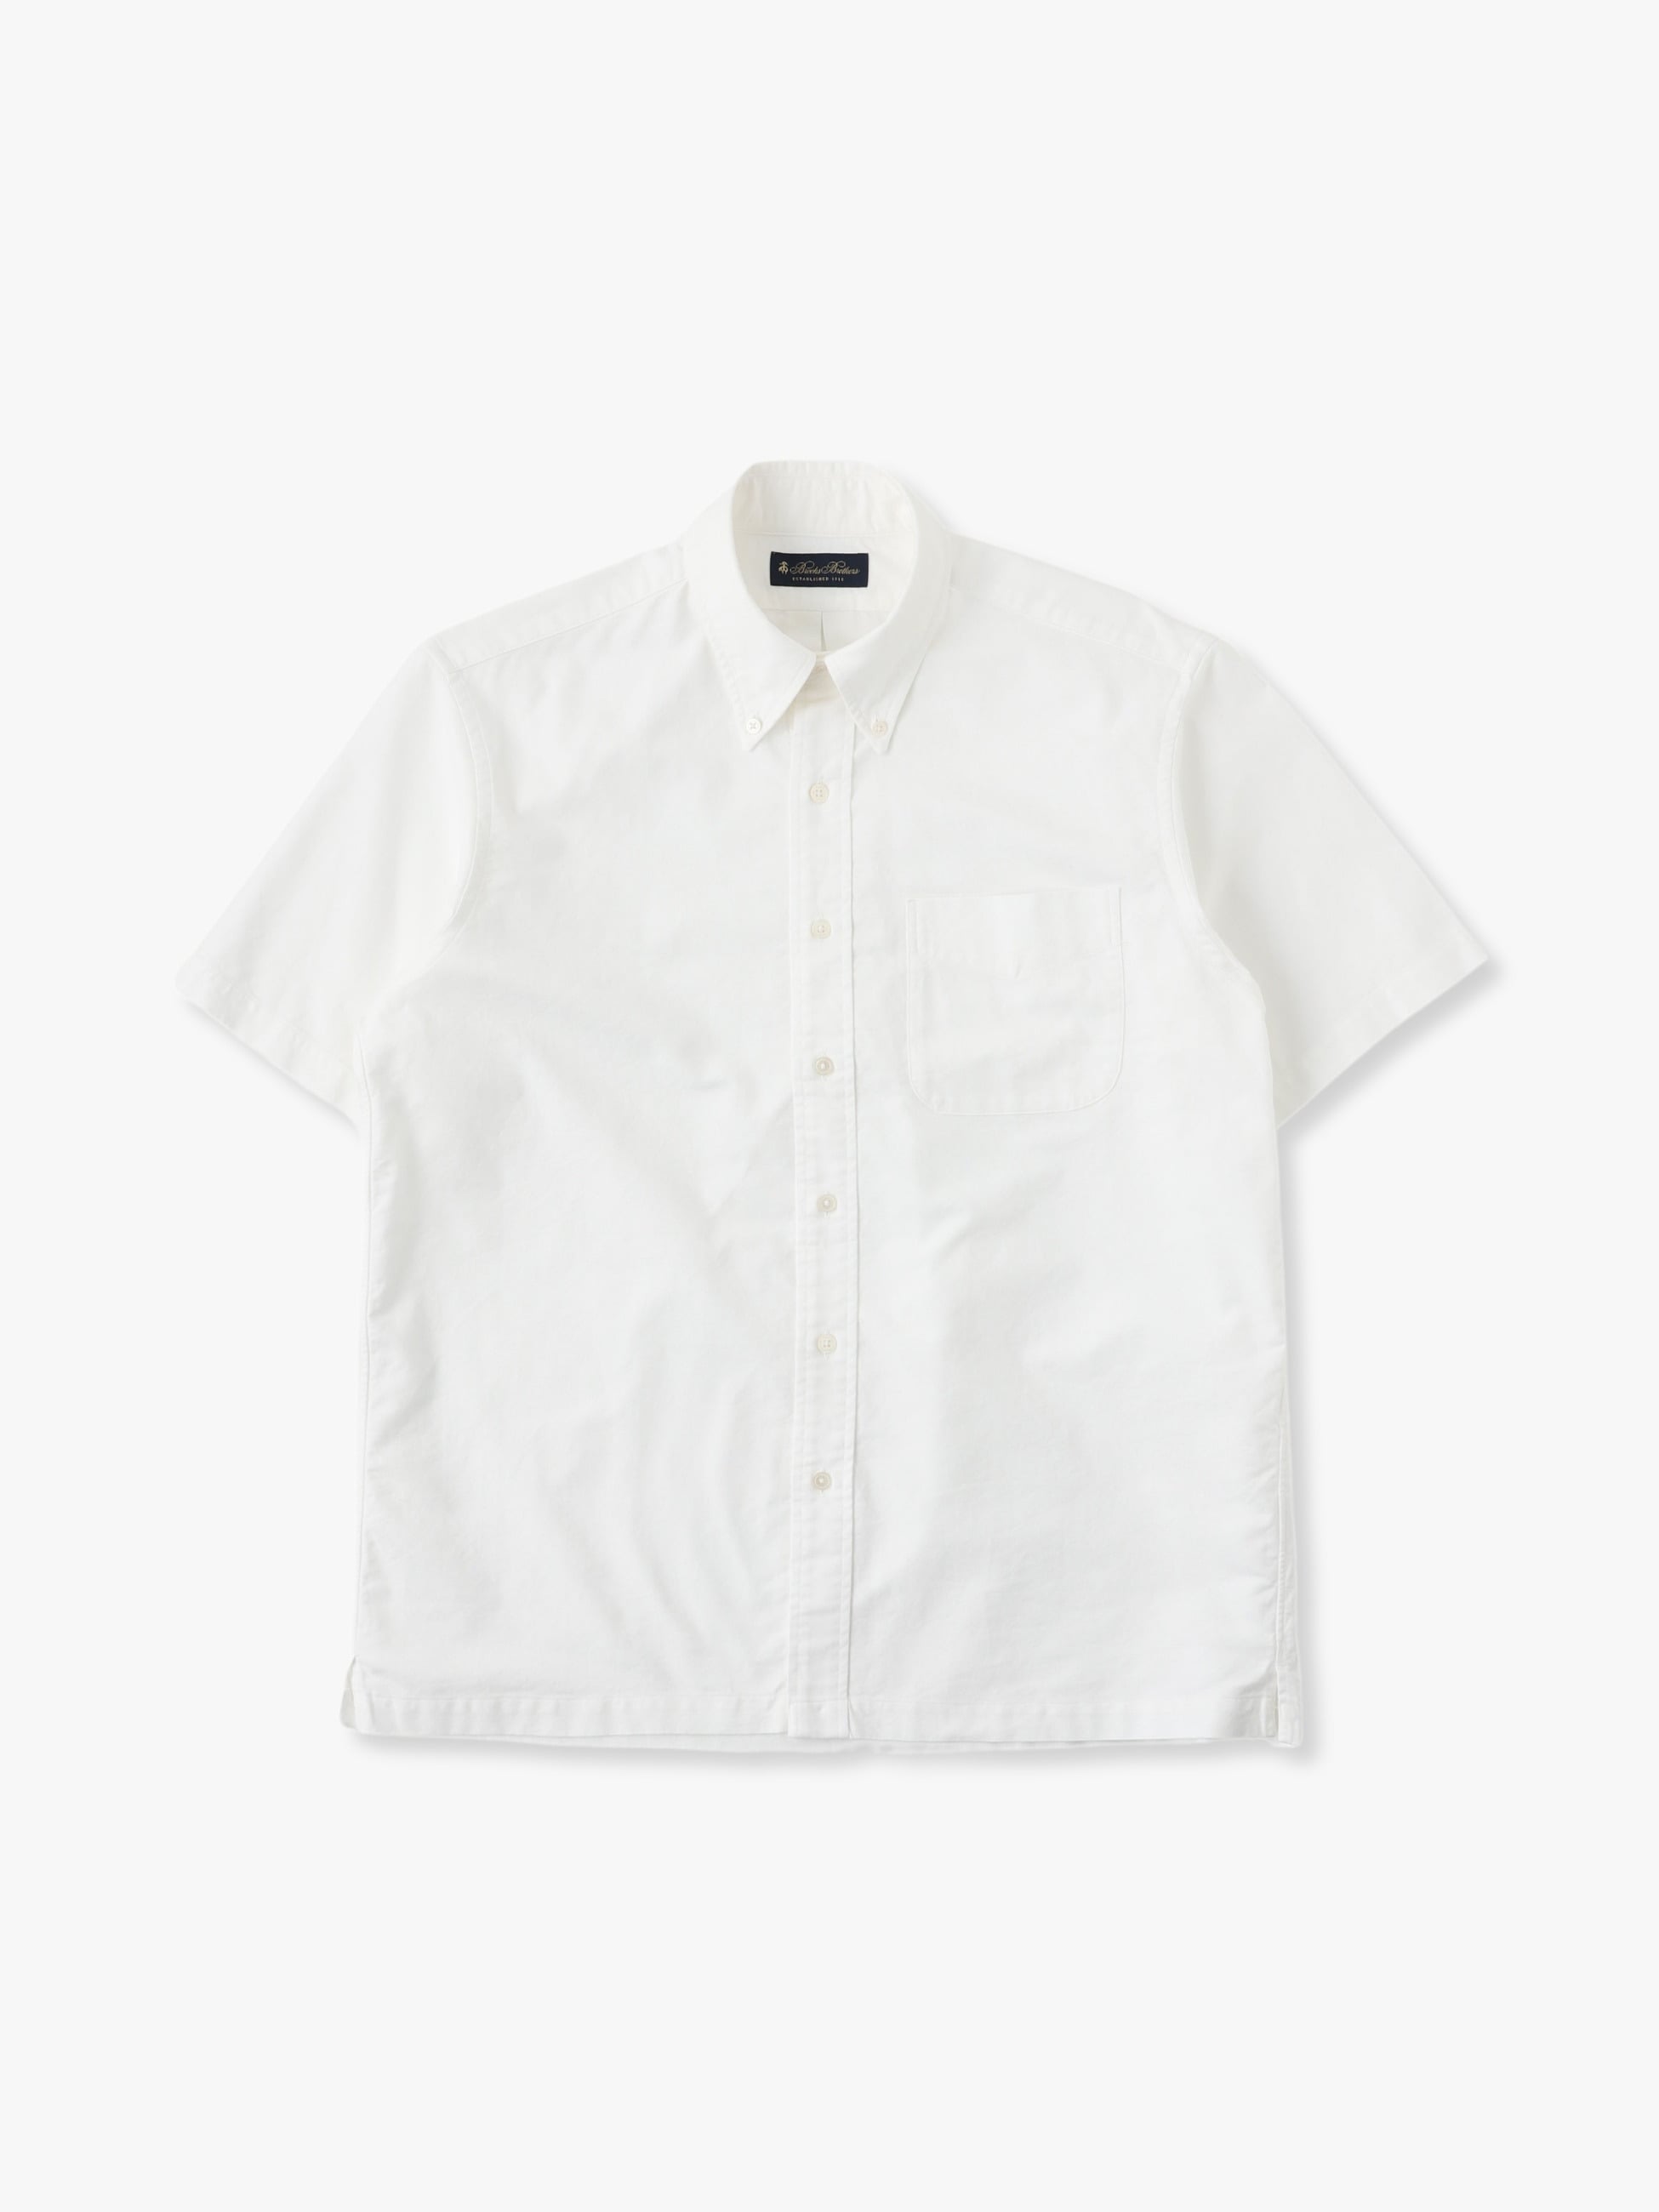 Brooks Brothers Square Tail Oxford Shirt